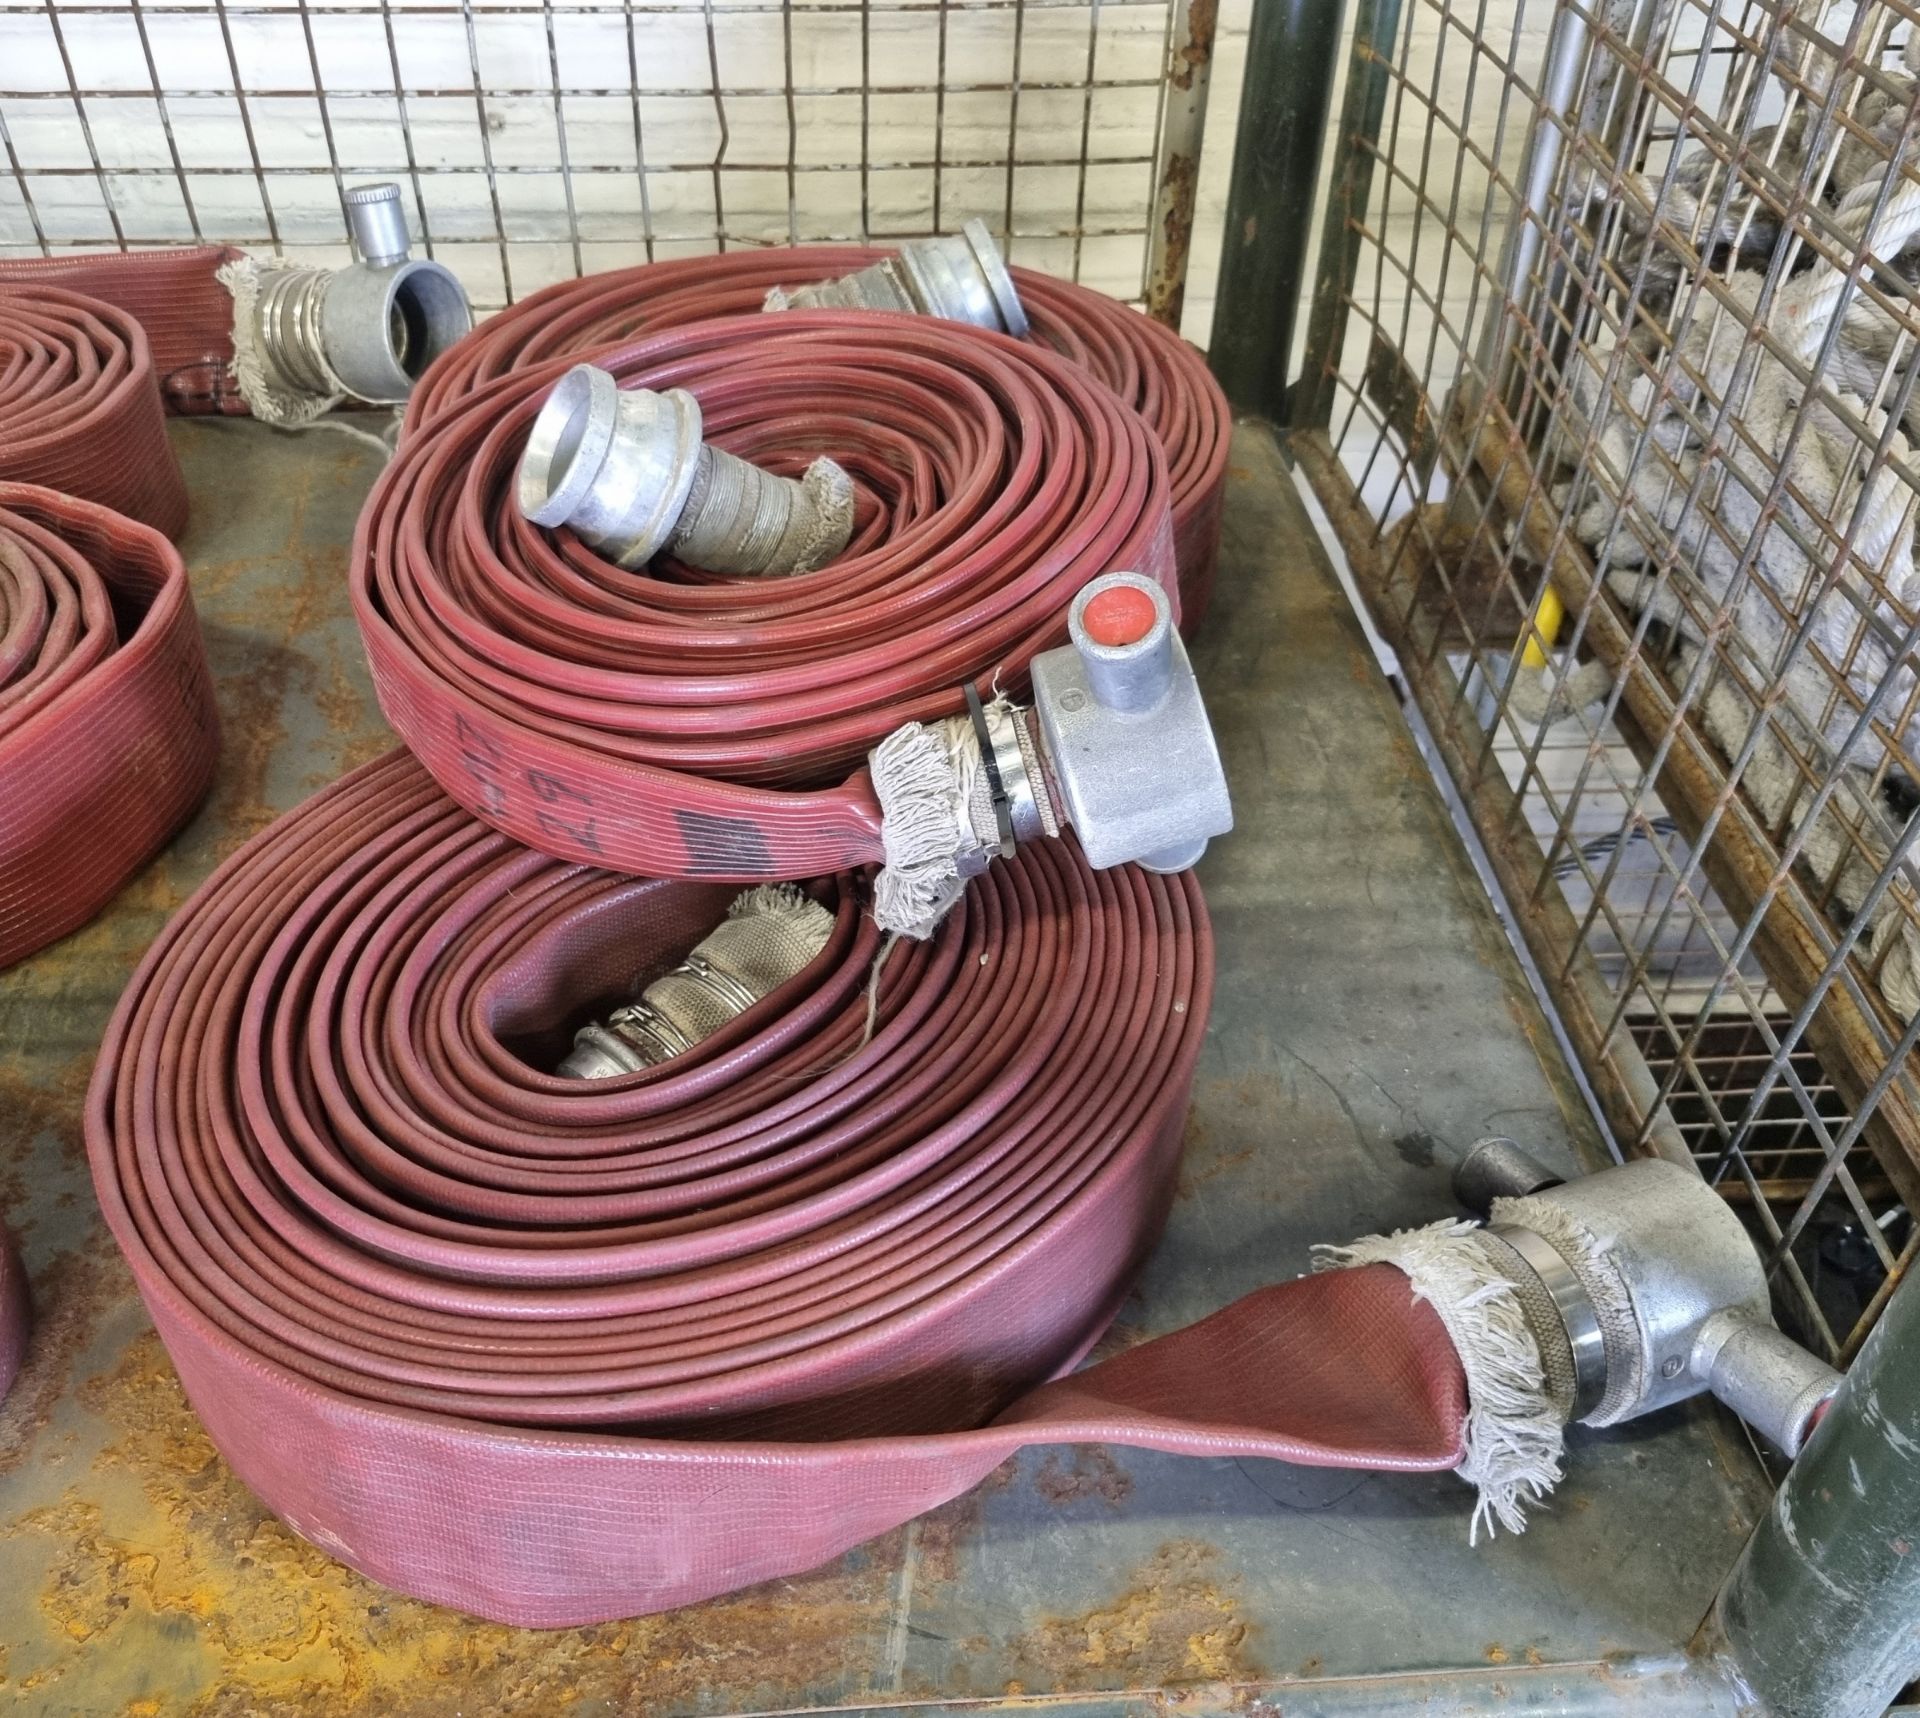 Angus Duraline 45mm lay flat hose with couplings - approx 10m in length, 2x Angus Duraline 64mm - Bild 3 aus 4